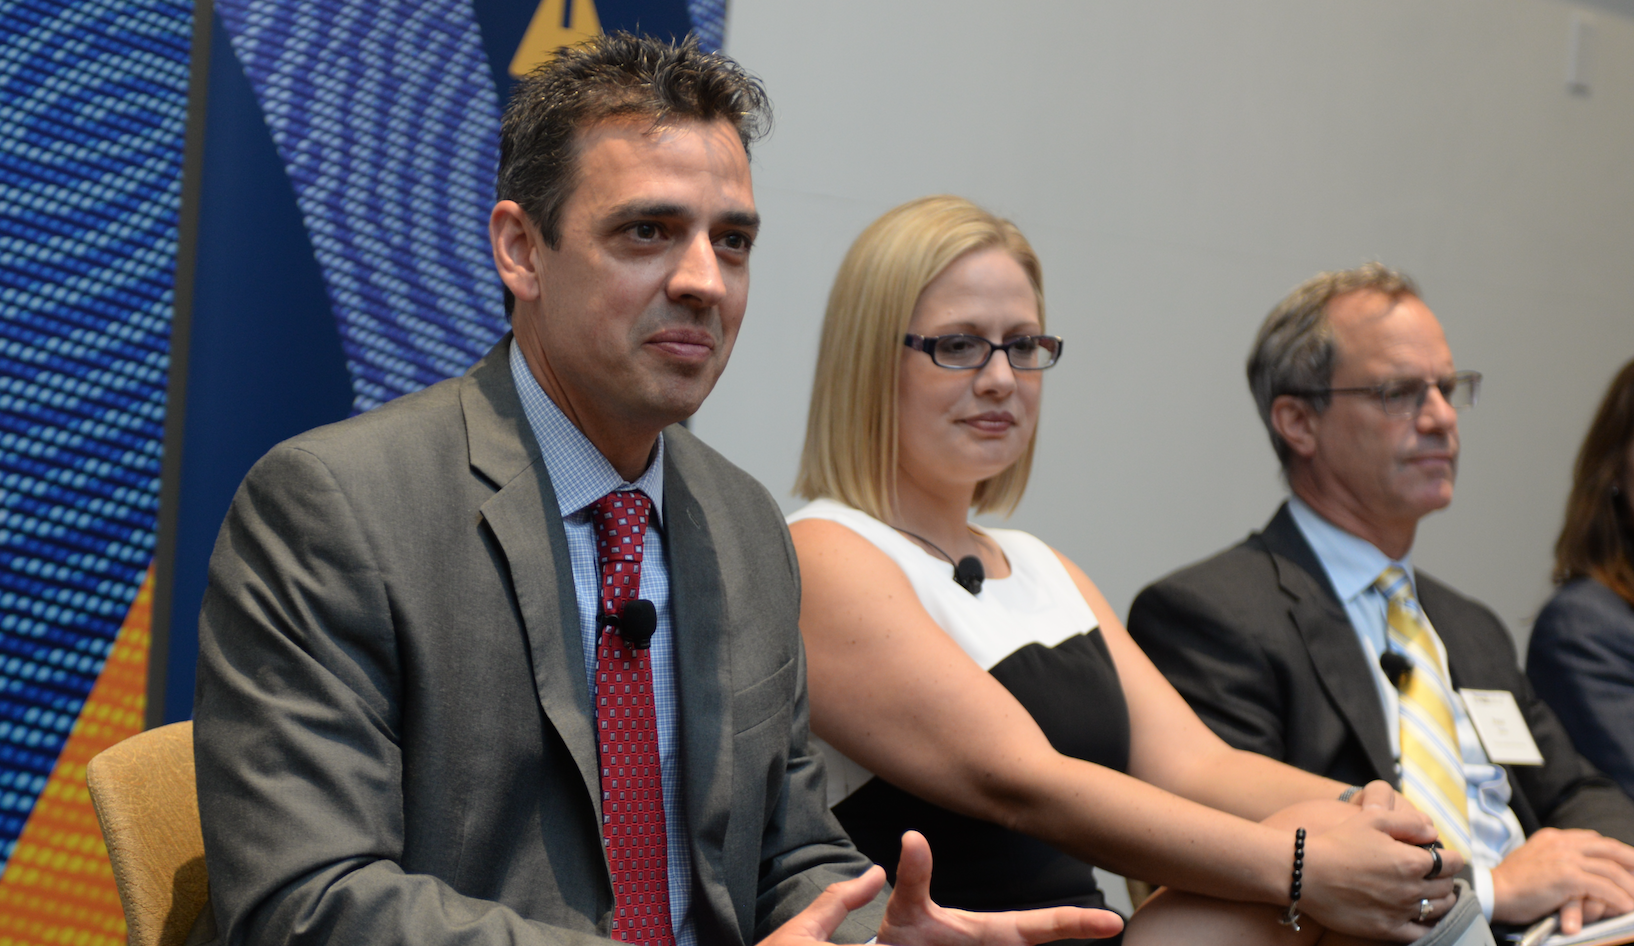 Rep. Tom Graves (R-Ga 14) and Rep. Kyrsten Sinema (D-Ariz. 9) hold a panel discussion at Georgia Tech to talk about cybersecurity policy and technical challenges. Peter Swire, a professor in the Scheller College of Business, was also on the panel. 